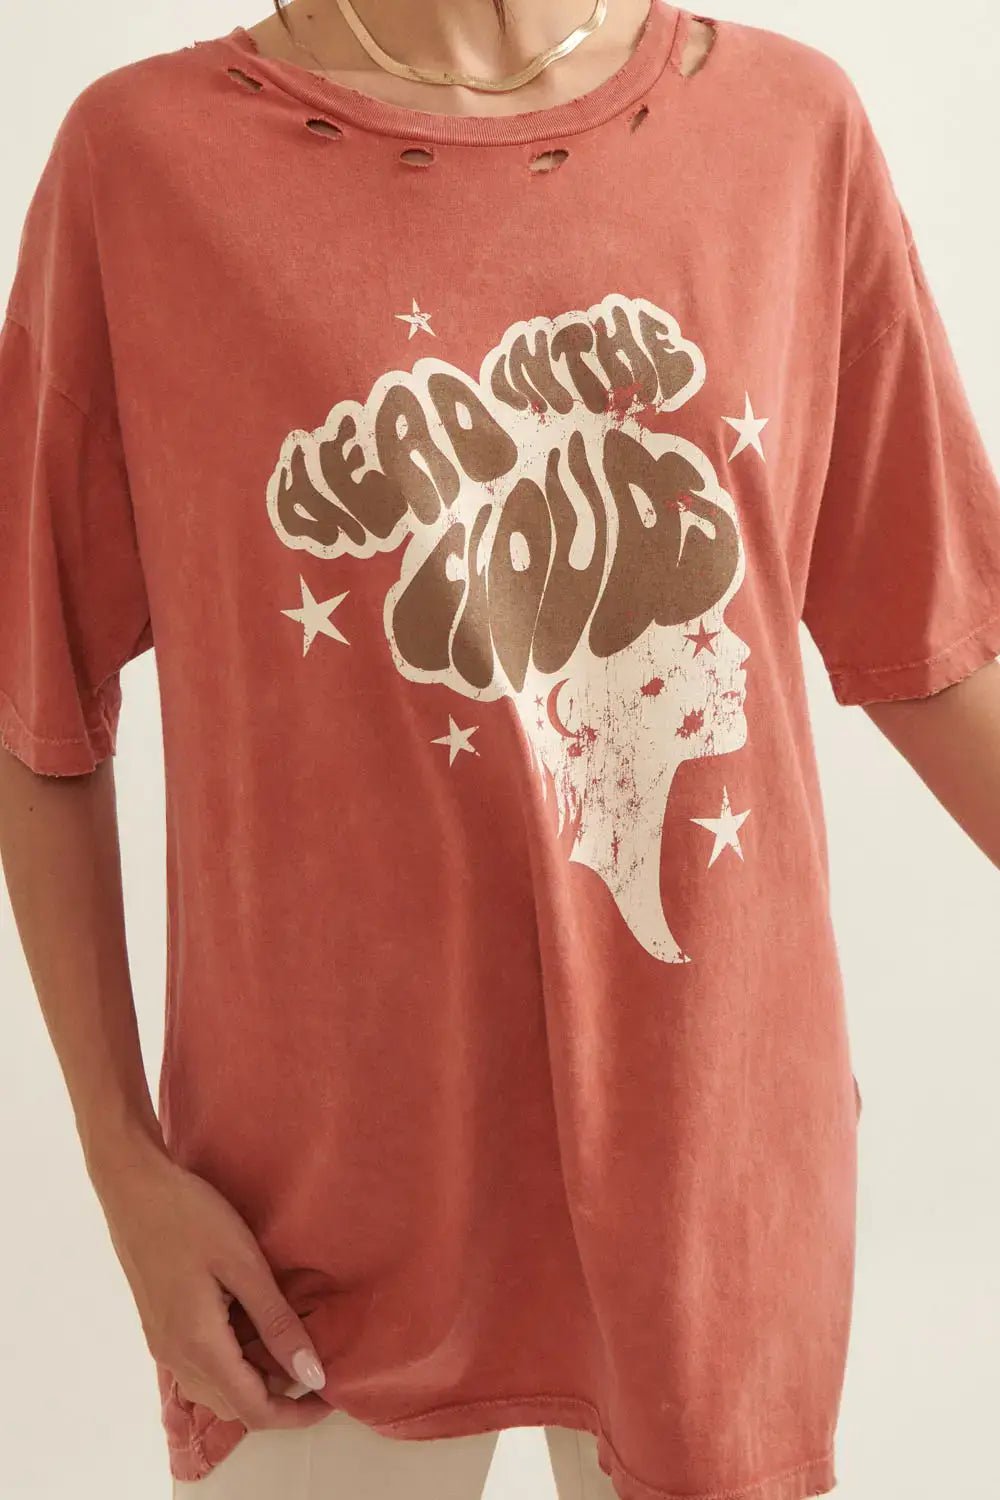 Head in the Clouds Mineral Wash Graphic Top - Graphic Tee